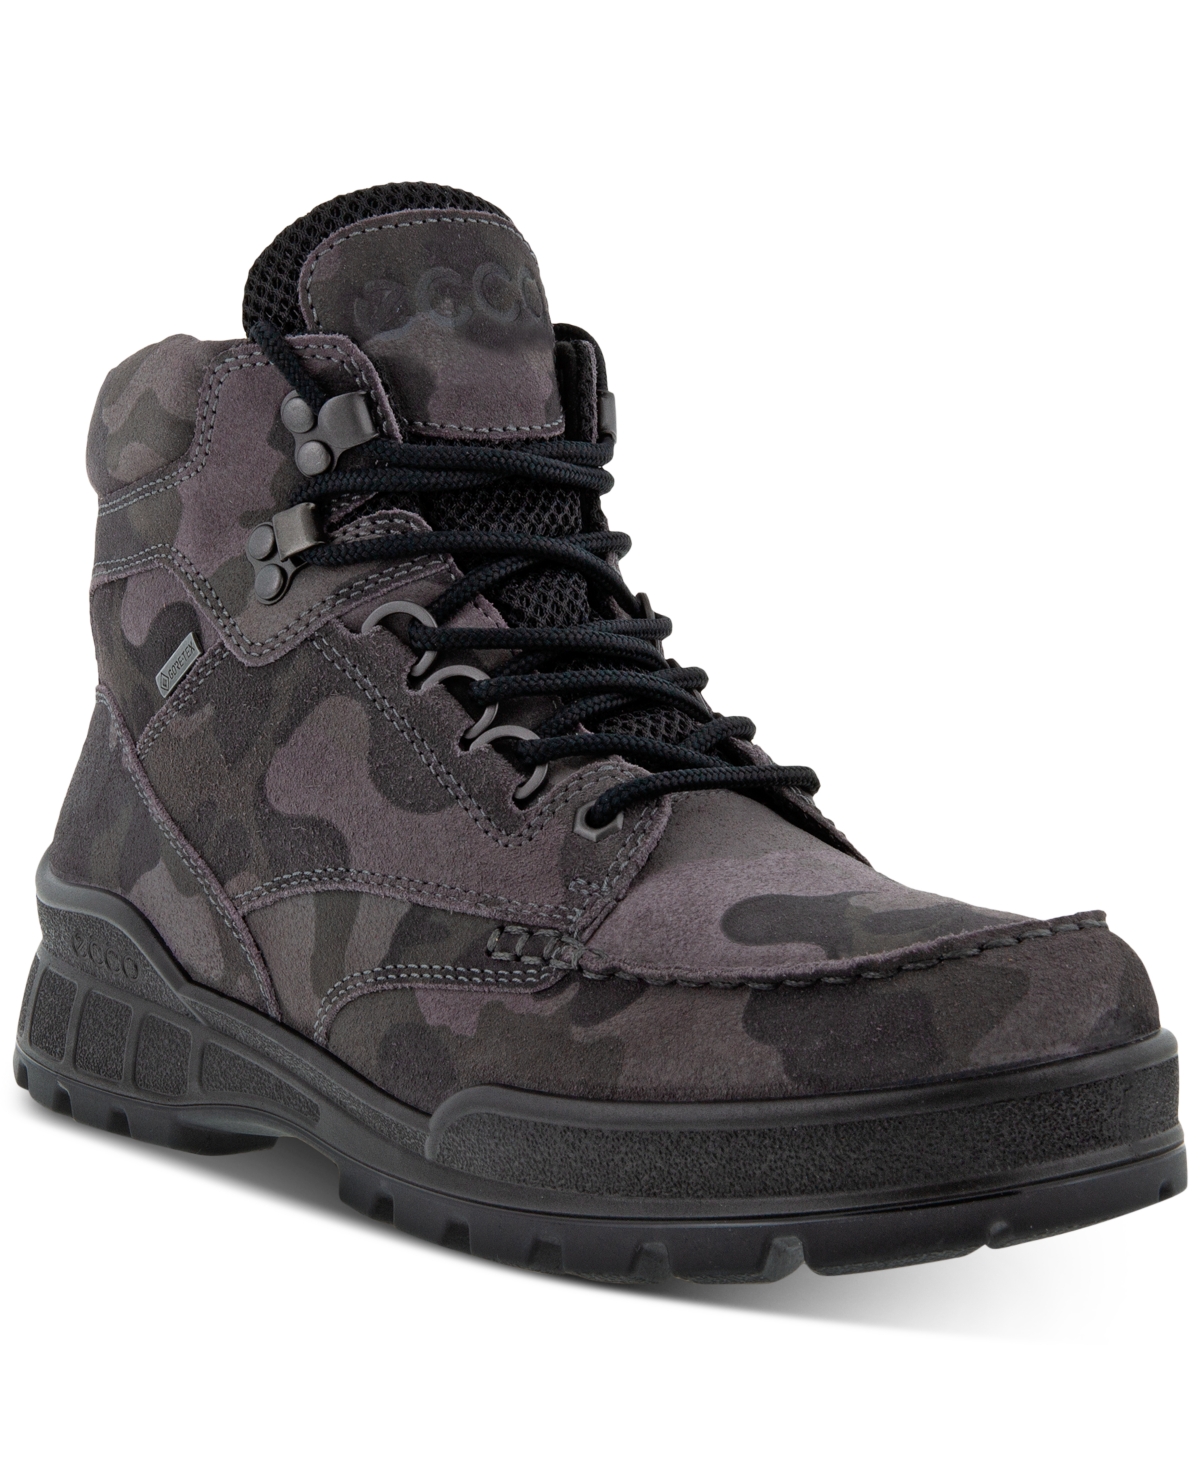 UPC 194890254879 product image for Ecco Men's Track 25 Mid Camouflage Waterproof Lace-Up Boots Men's Shoes | upcitemdb.com